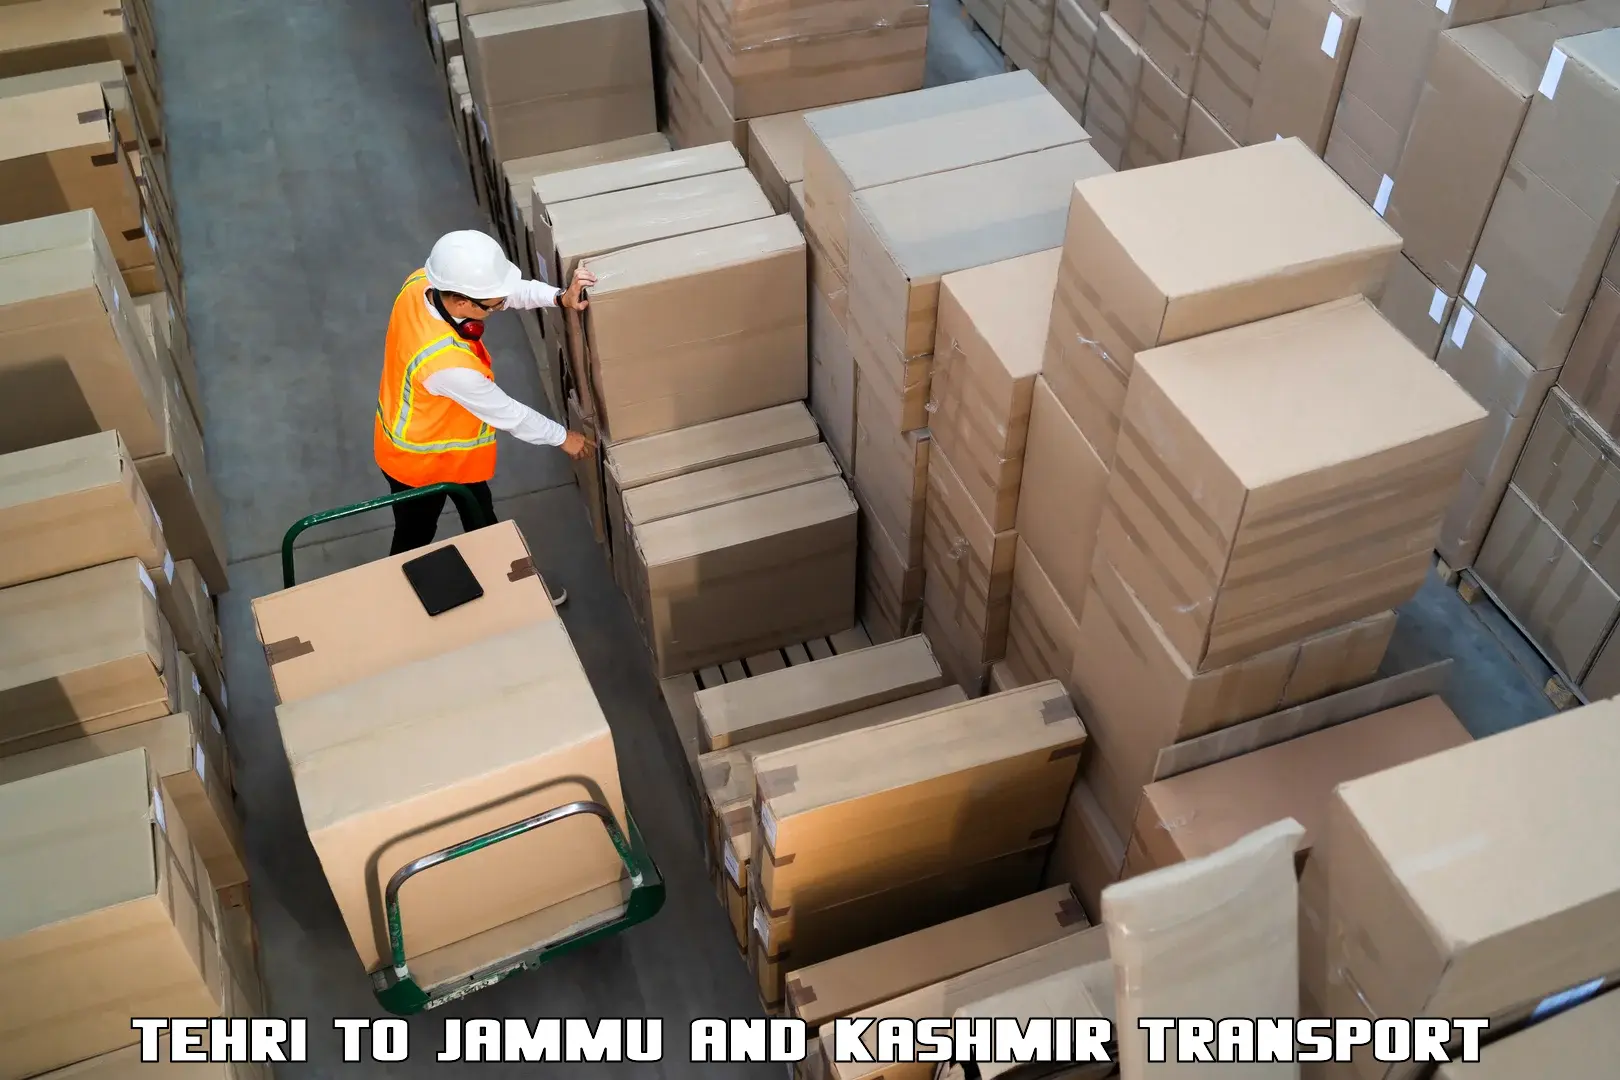 Container transport service Tehri to University of Jammu